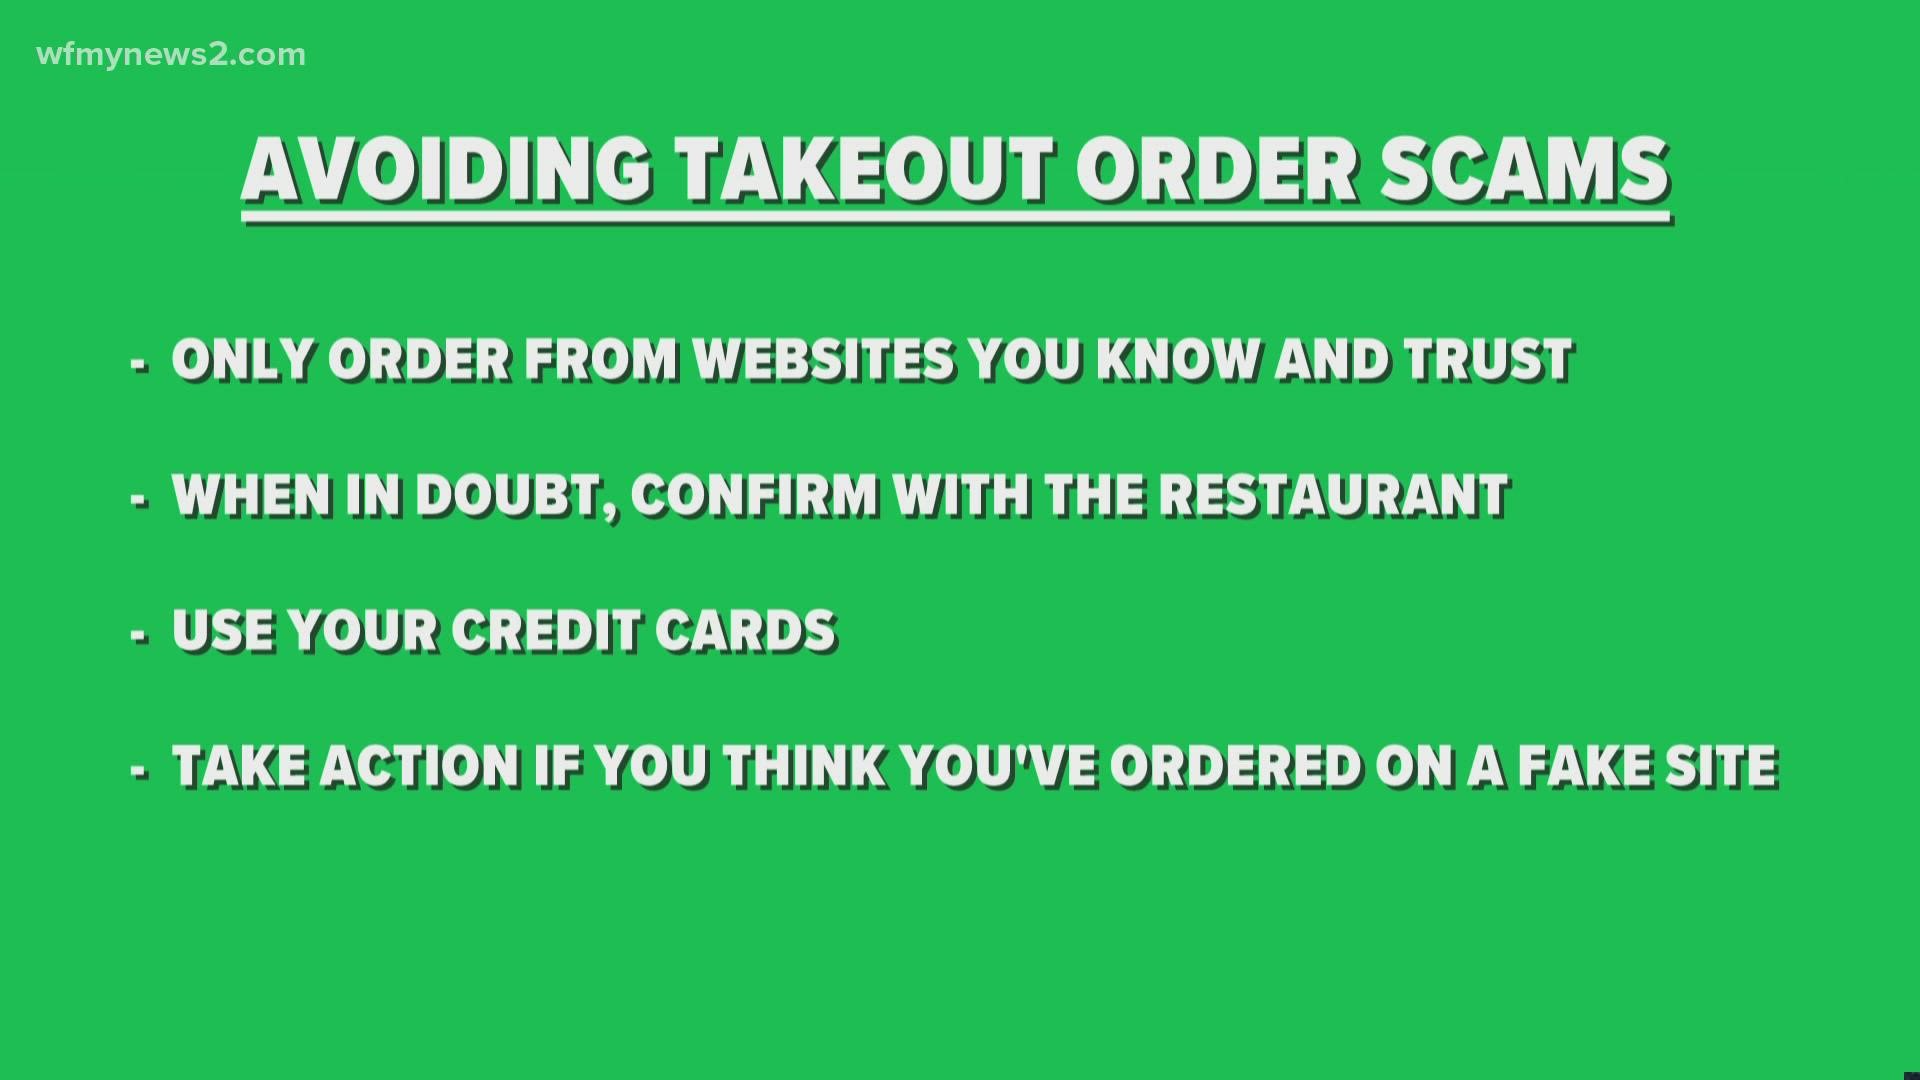 As technology advances, so do scammers. There are now digital wallet scams and takeout scams you should know about.